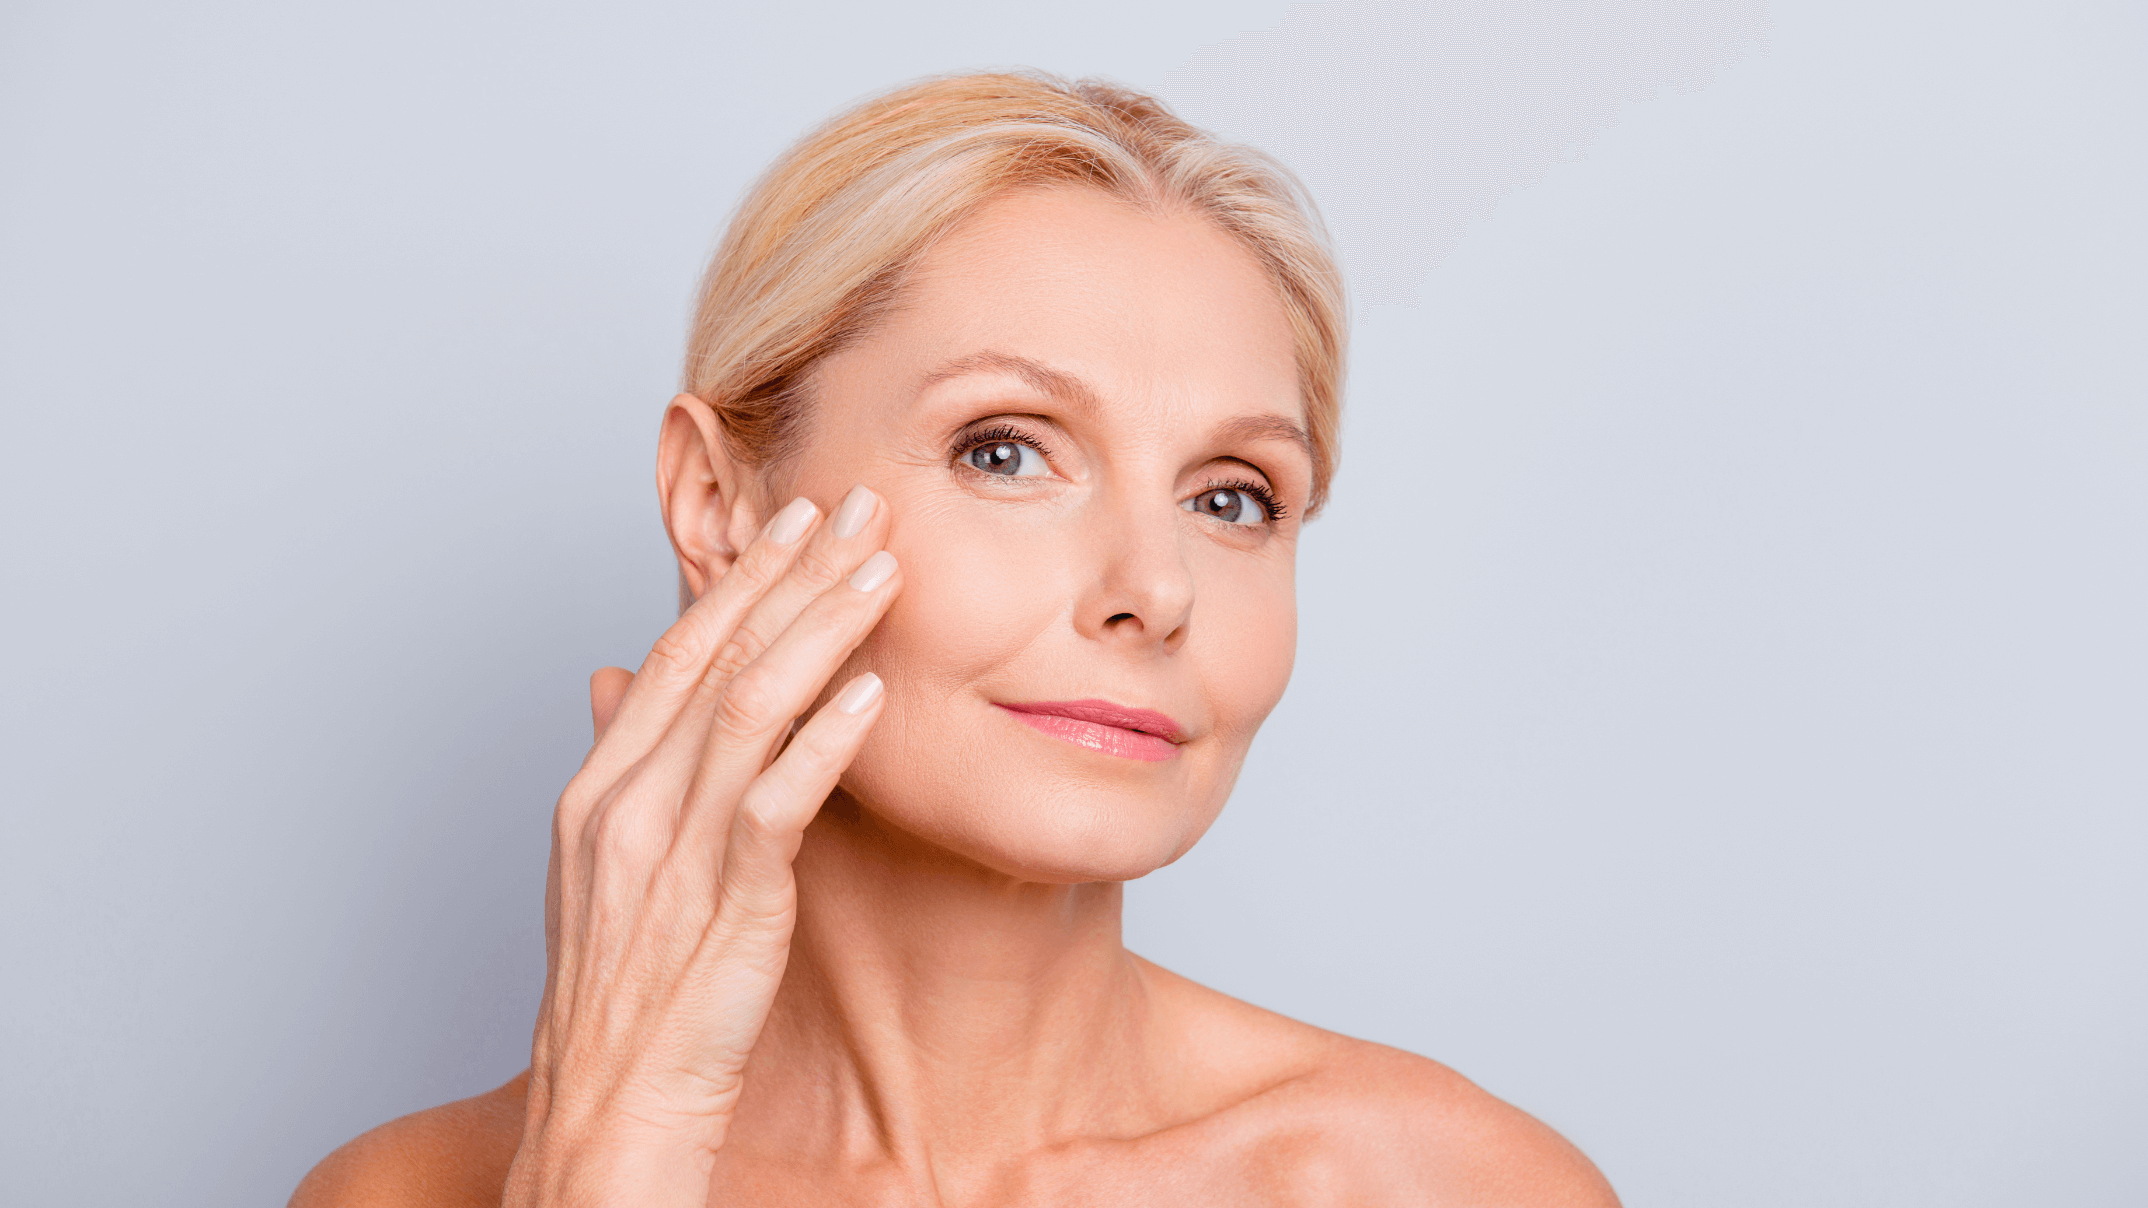 woman applying skin care product to face